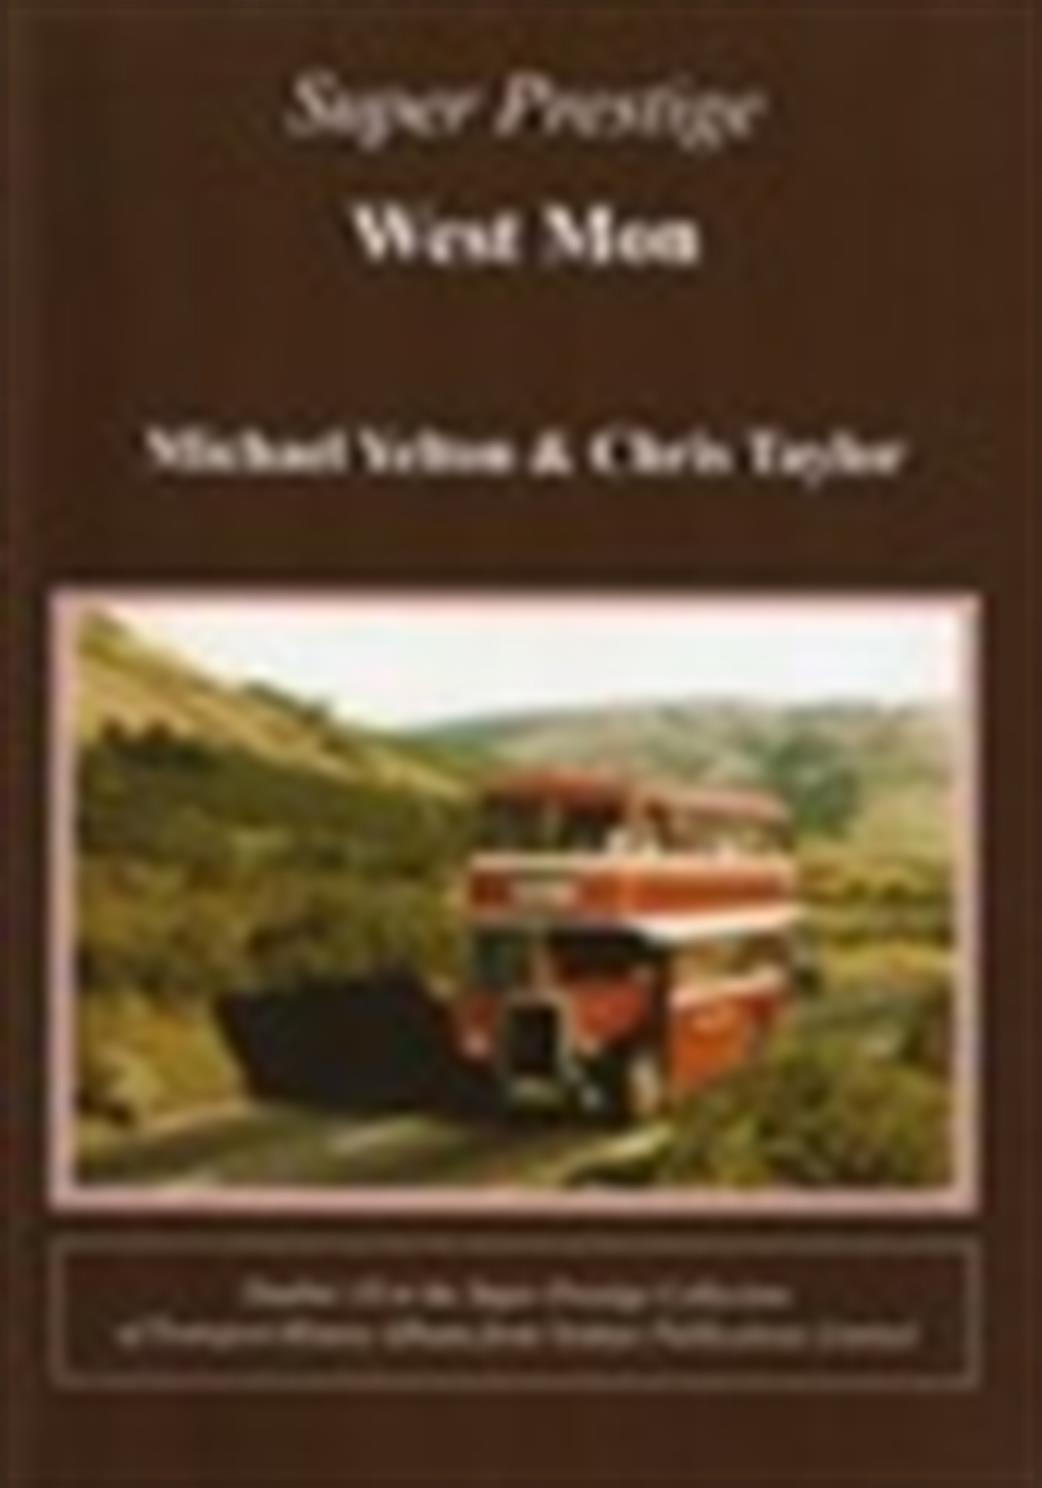 Pen & Sword  9781905304264 The History of The West Monmouthshire Omnibus Board 1926-74 by Michael Yelton and Chris Taylor